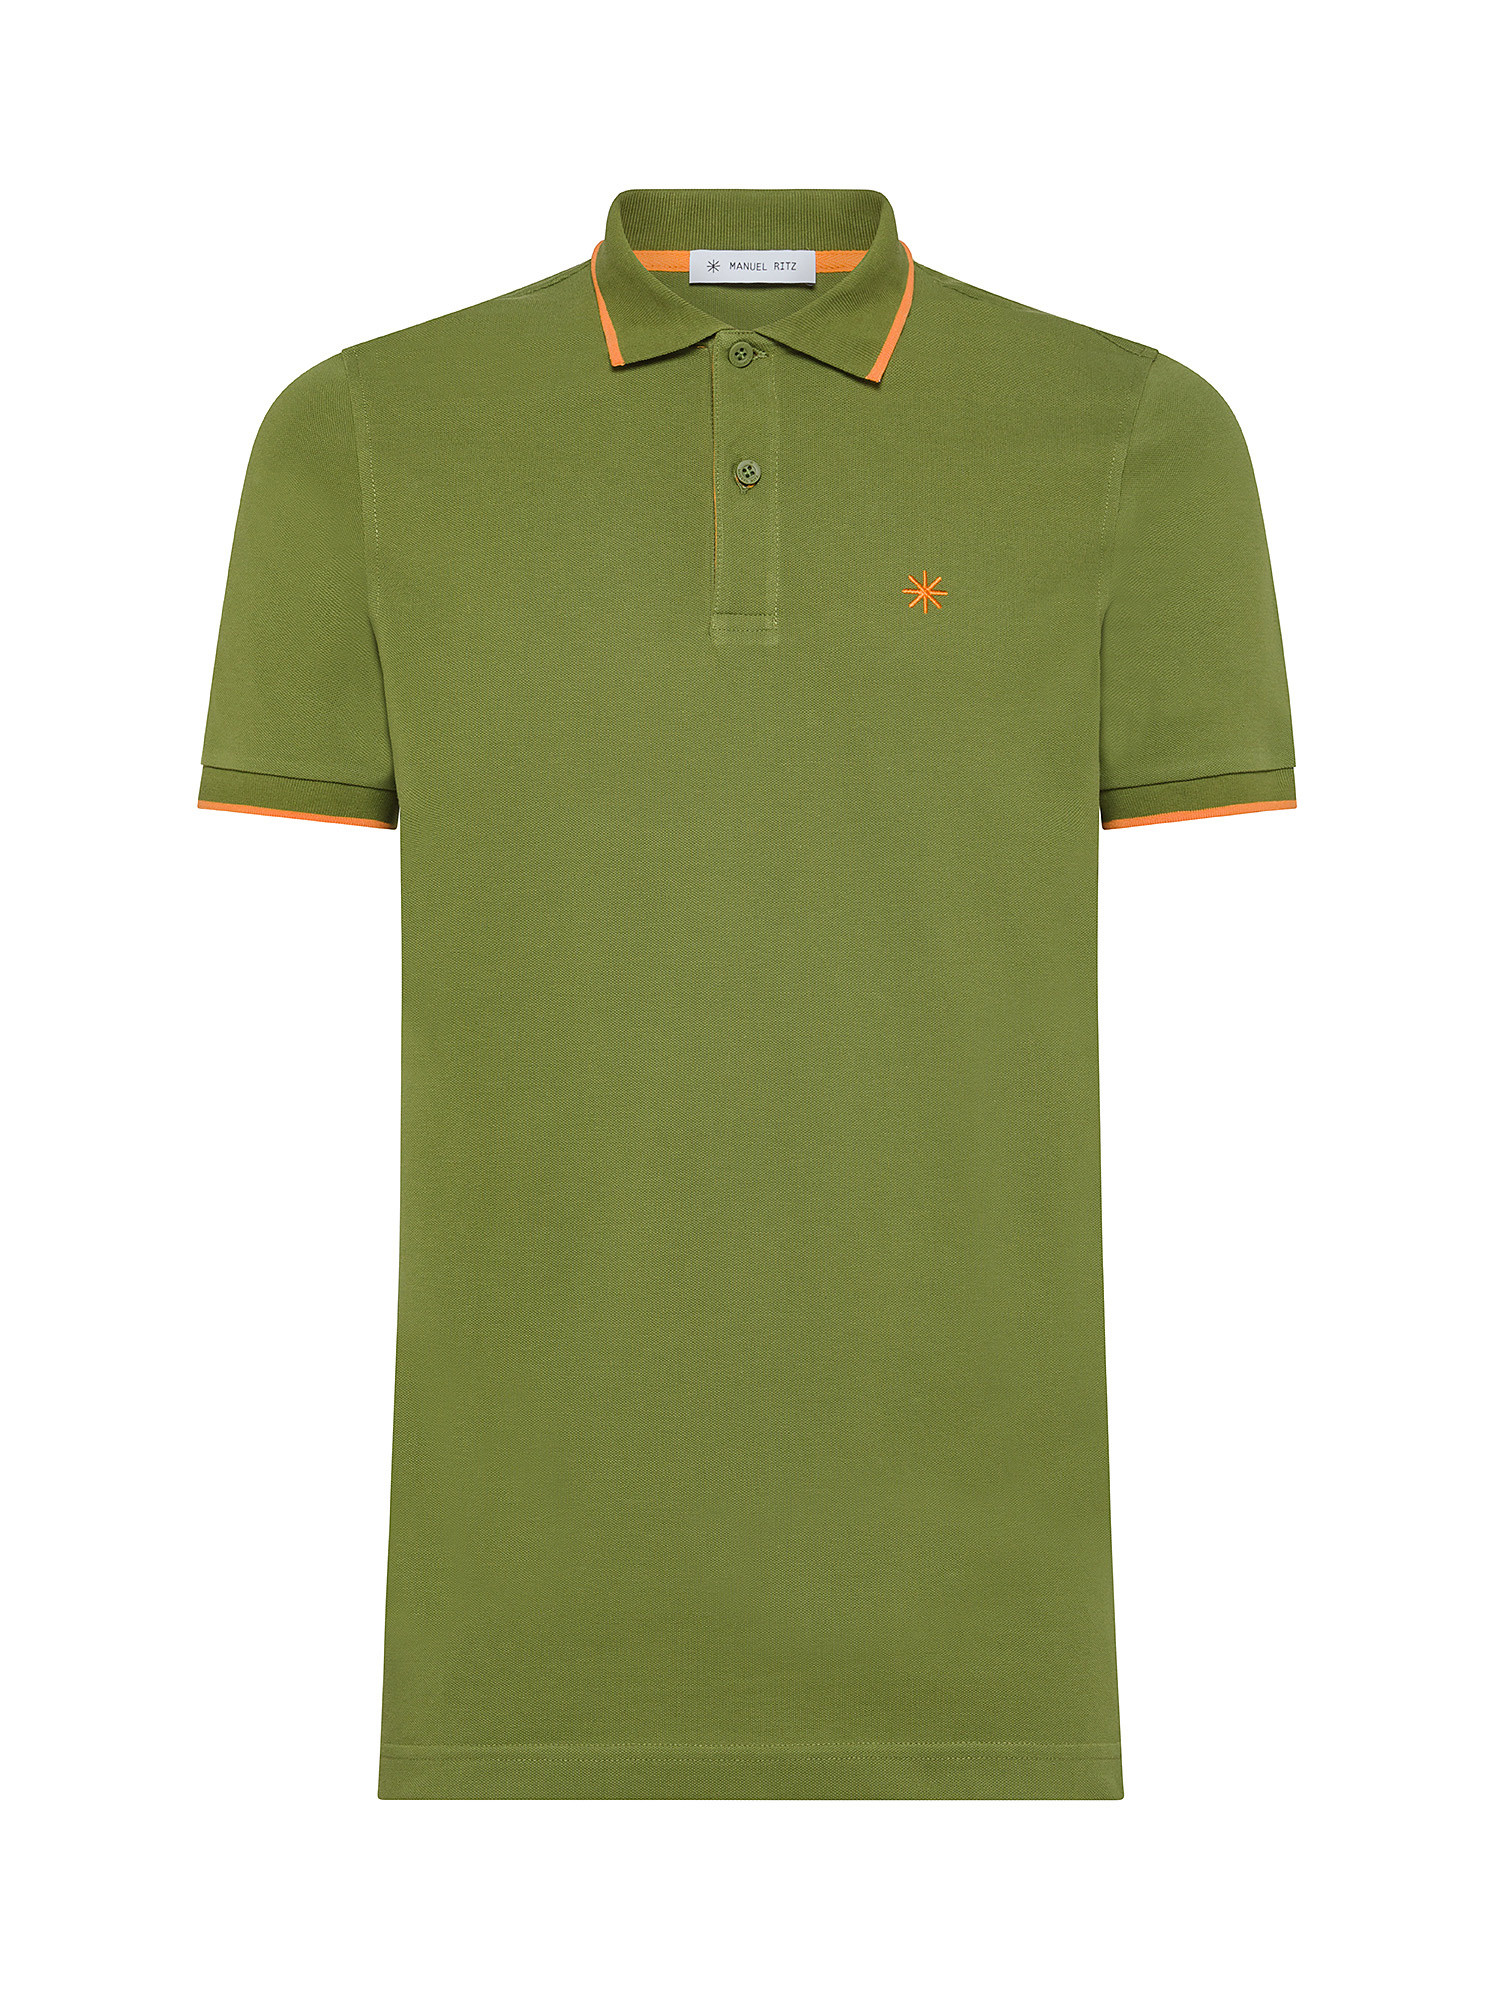 Manuel Ritz - Polo with contrasting edges and logo, Green, large image number 0